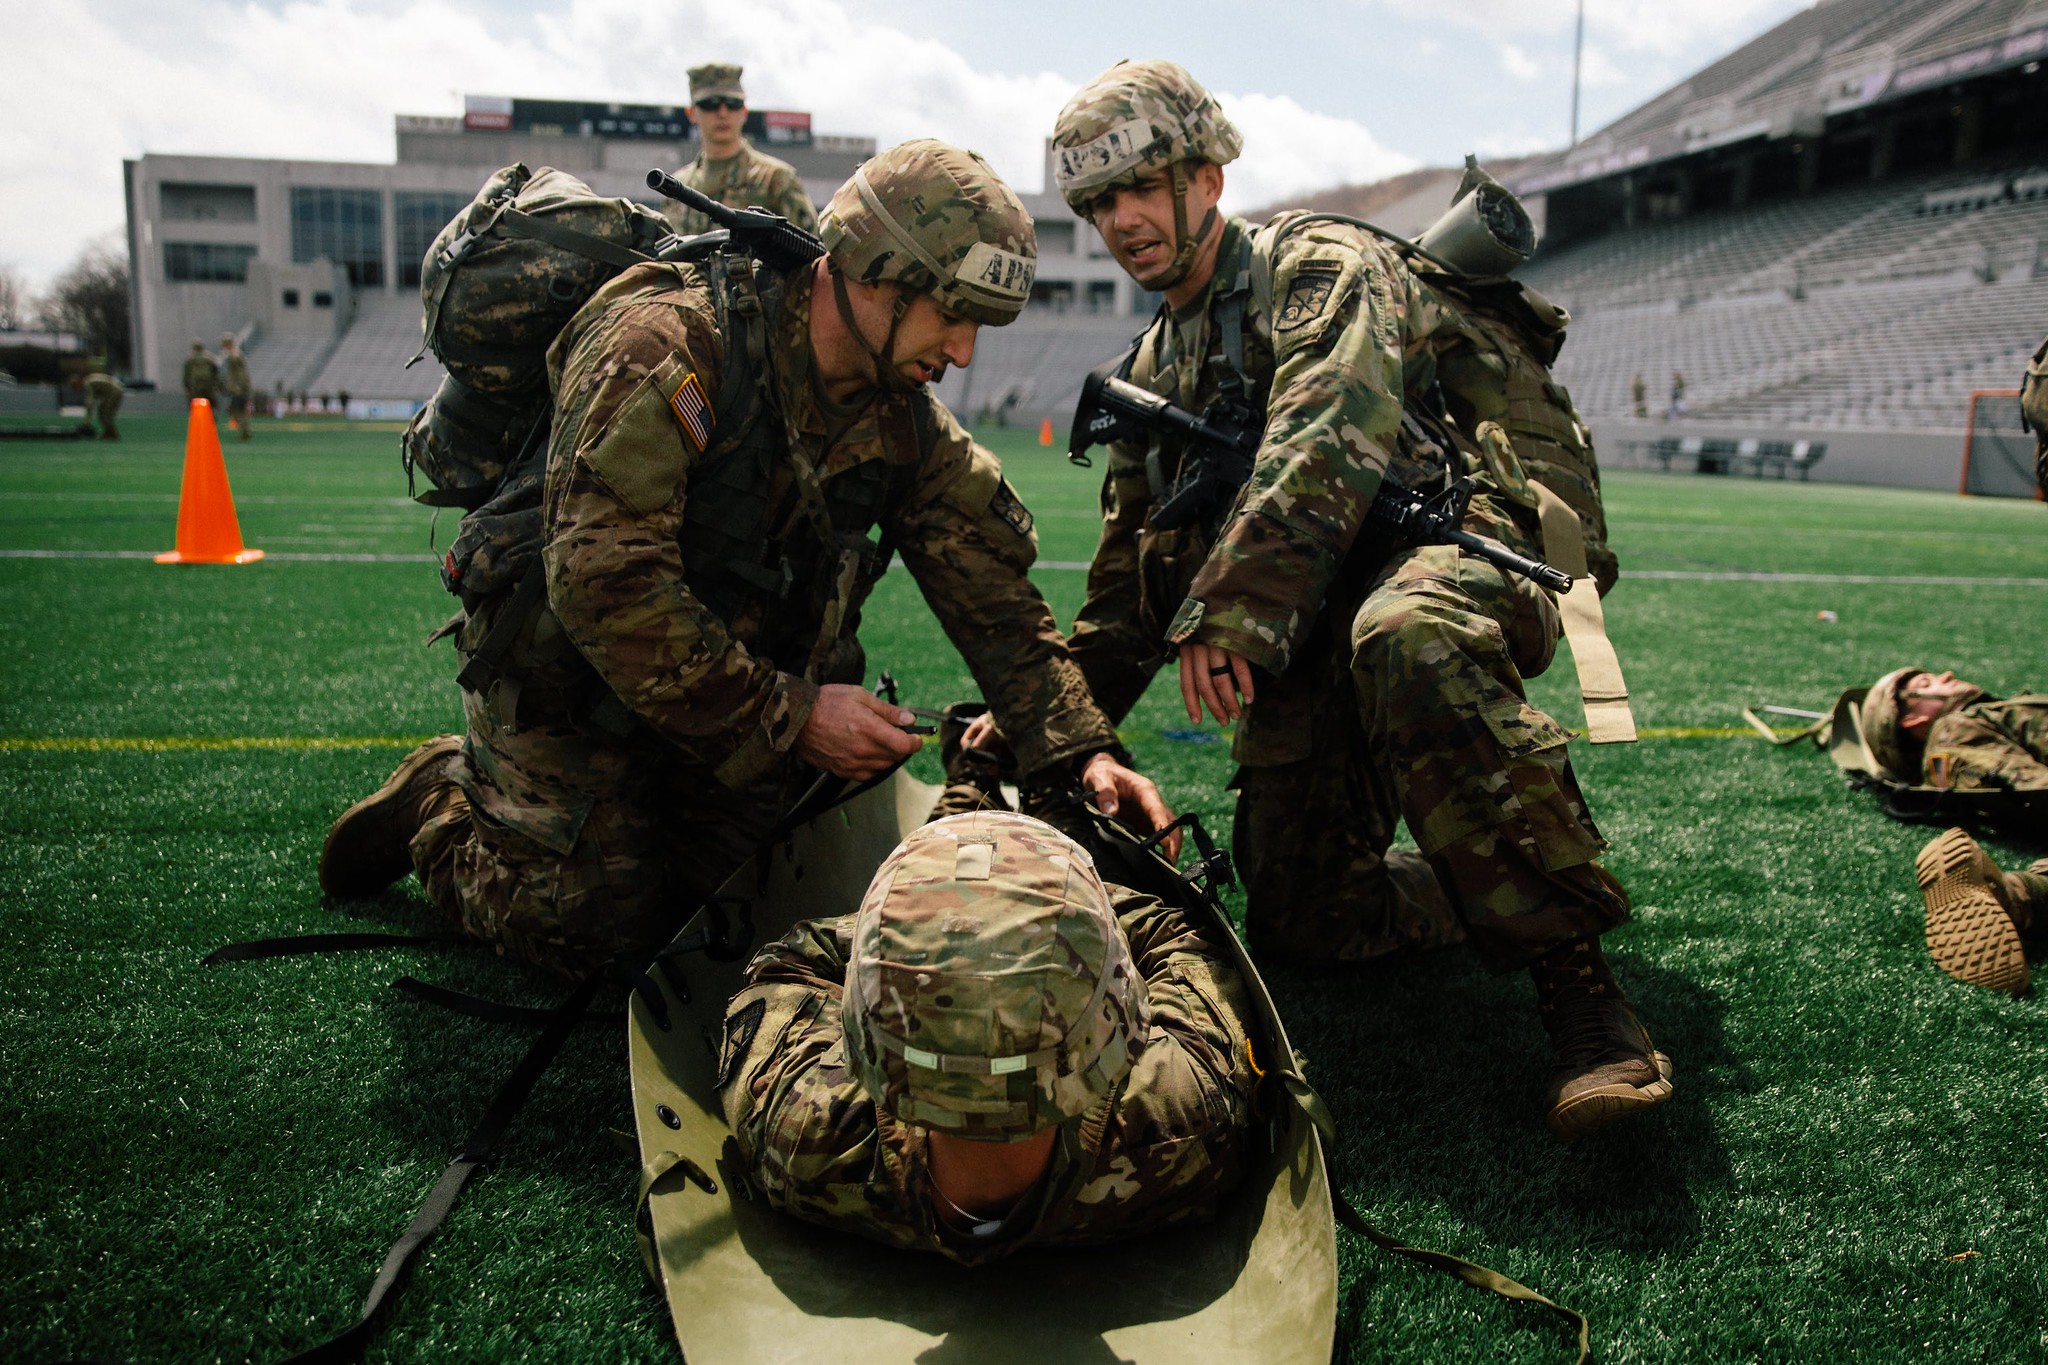 ArmyPic_2: Cadets Walt Higbee and Steven Price prepare during the last event at the Sandhurst competition April 13-14 at West Point, New York.